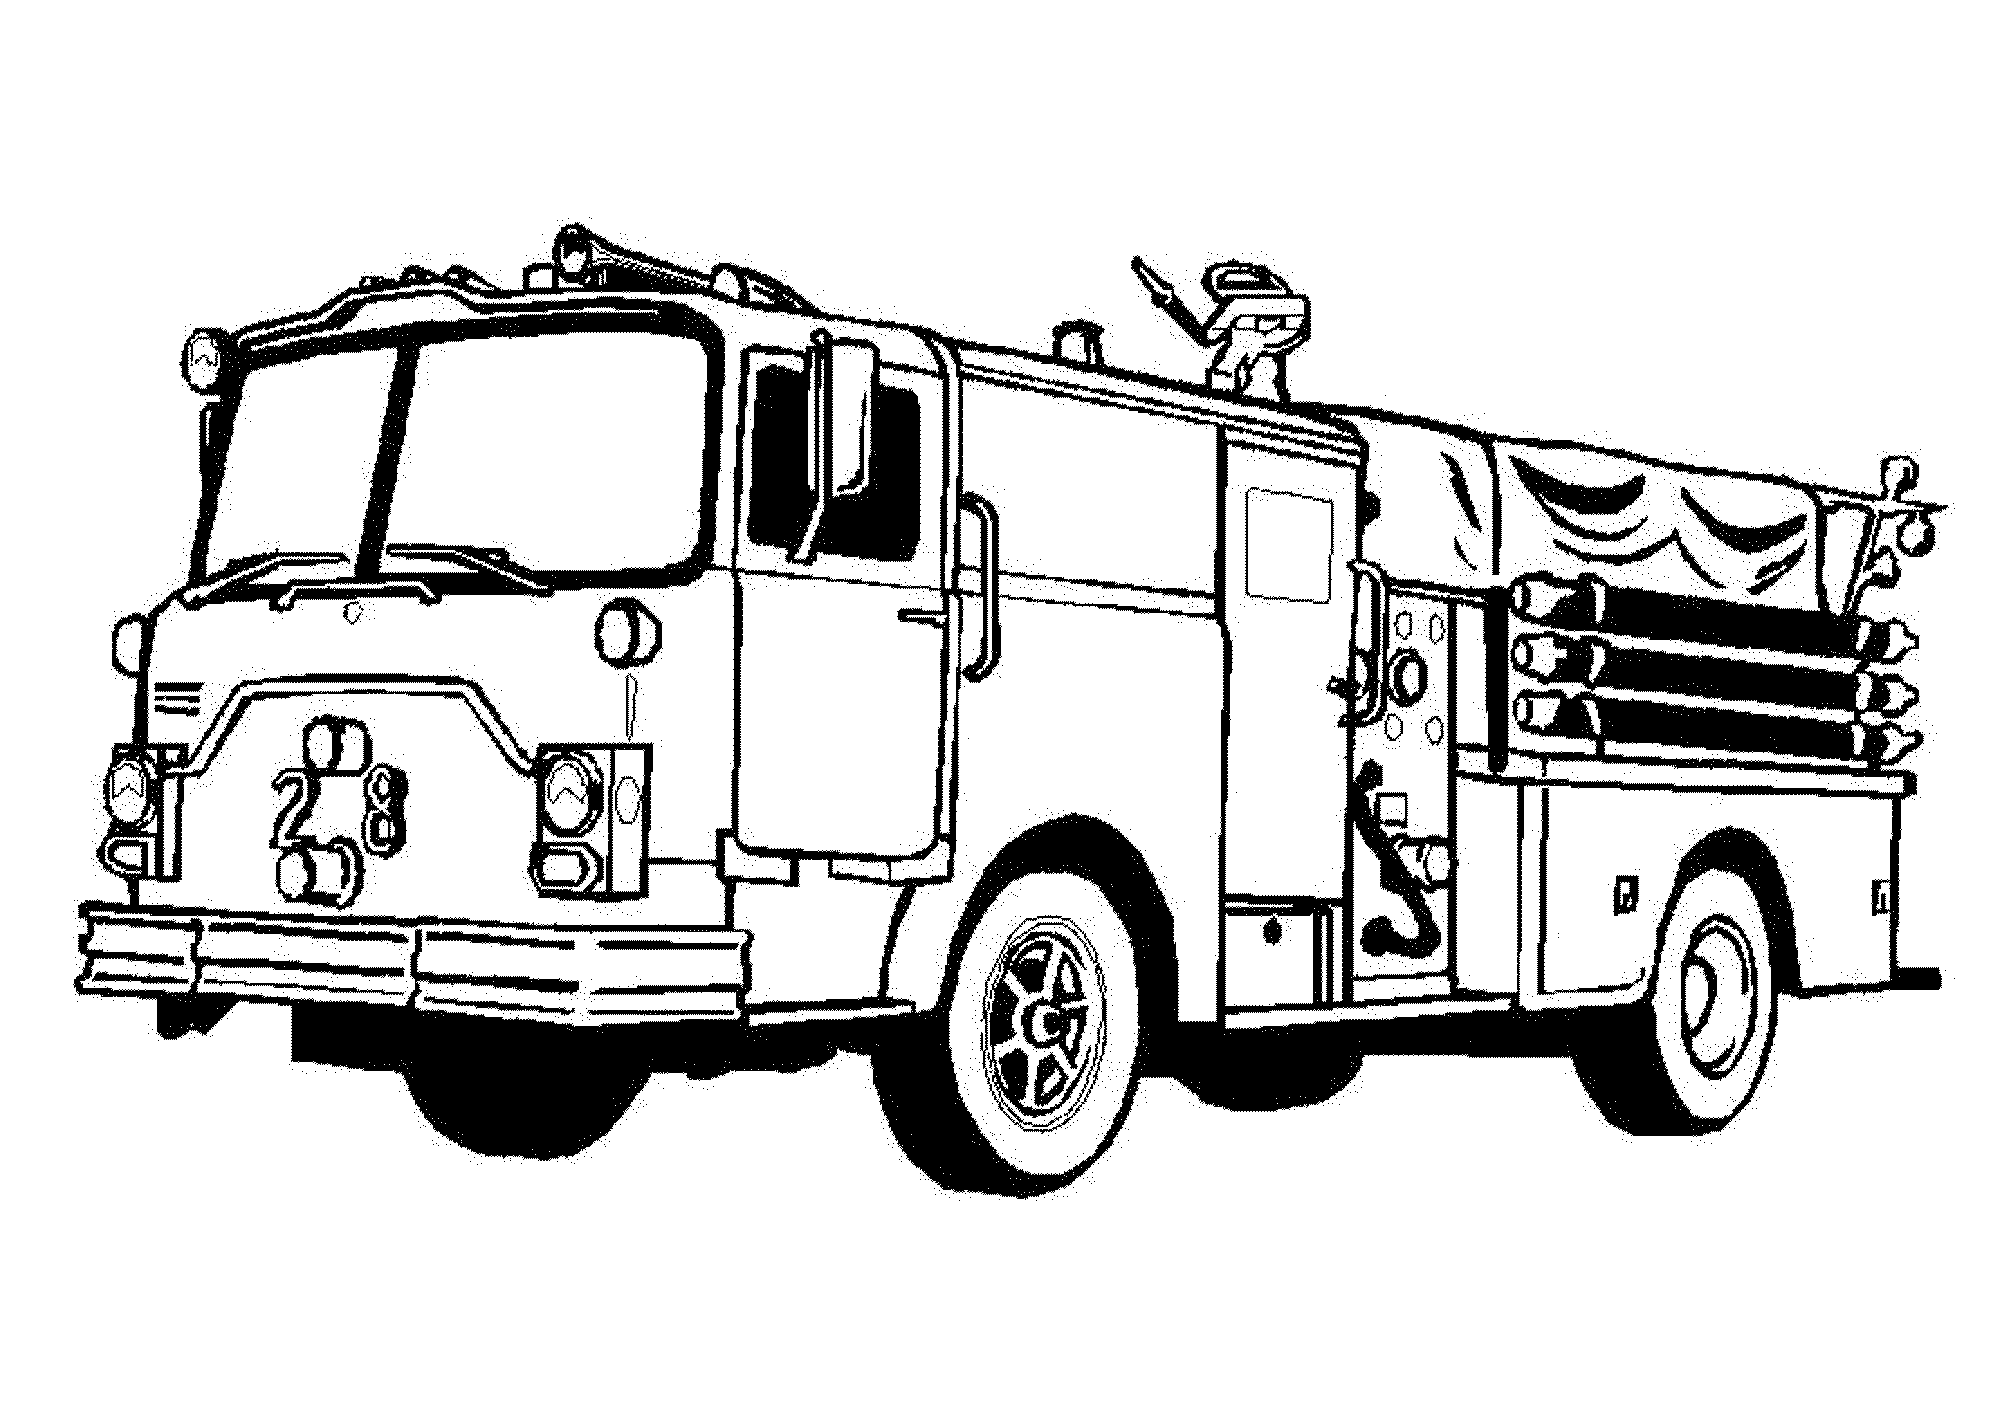 Lego Fire Truck Coloring Pages at GetDrawings  Free download